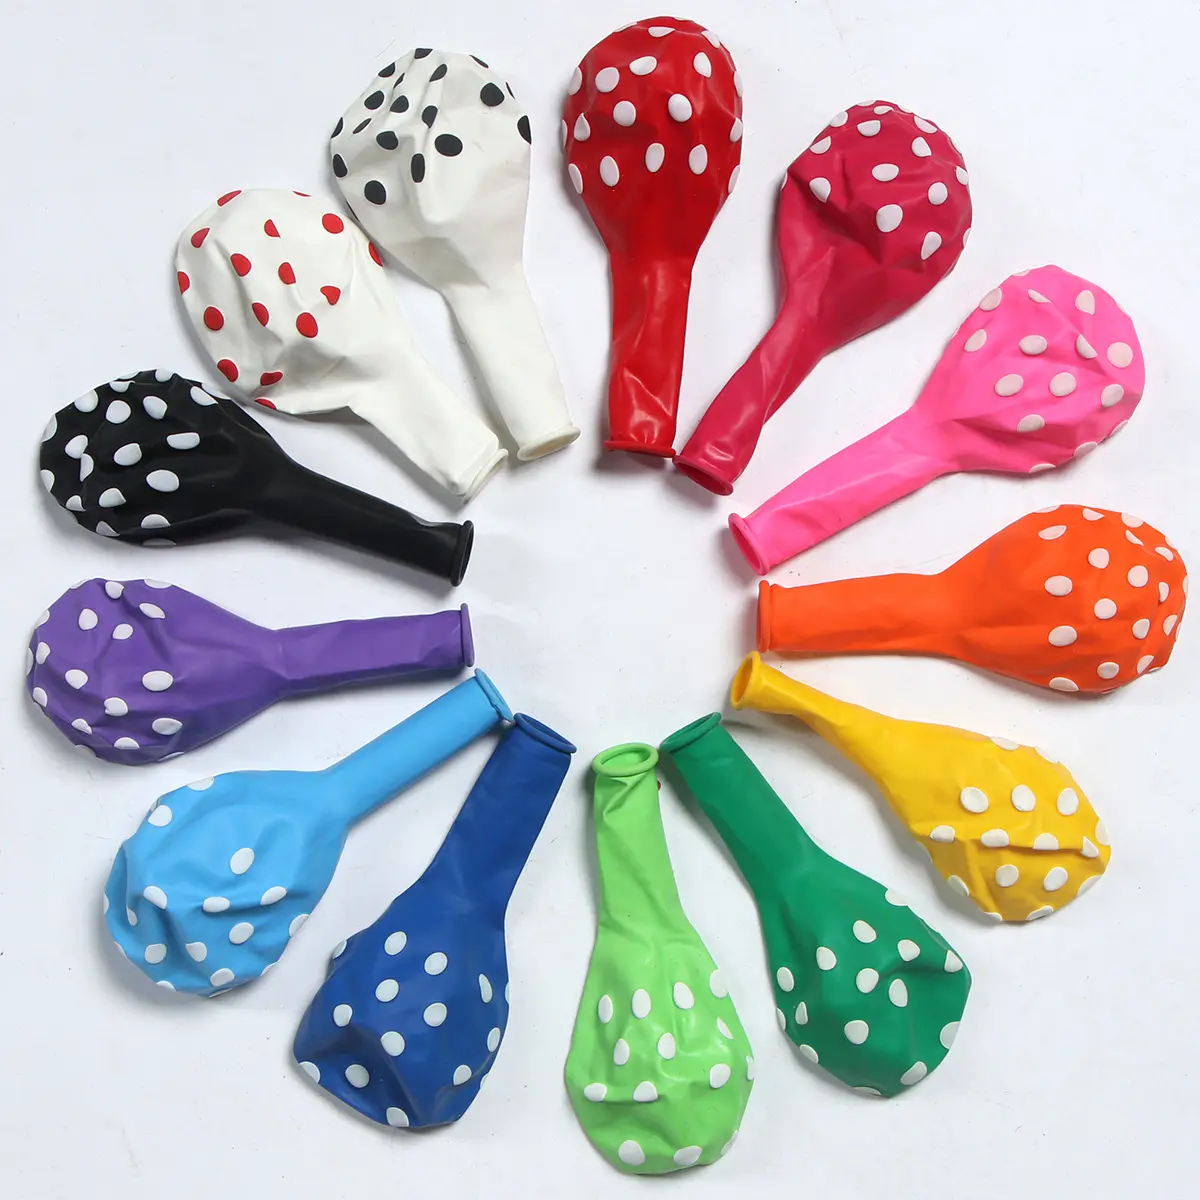 Colorful Balloons Party Balloons Birthday Party Wedding Decoration 12 Inch Round Color Polka Dot Latex Balloons Wholesale